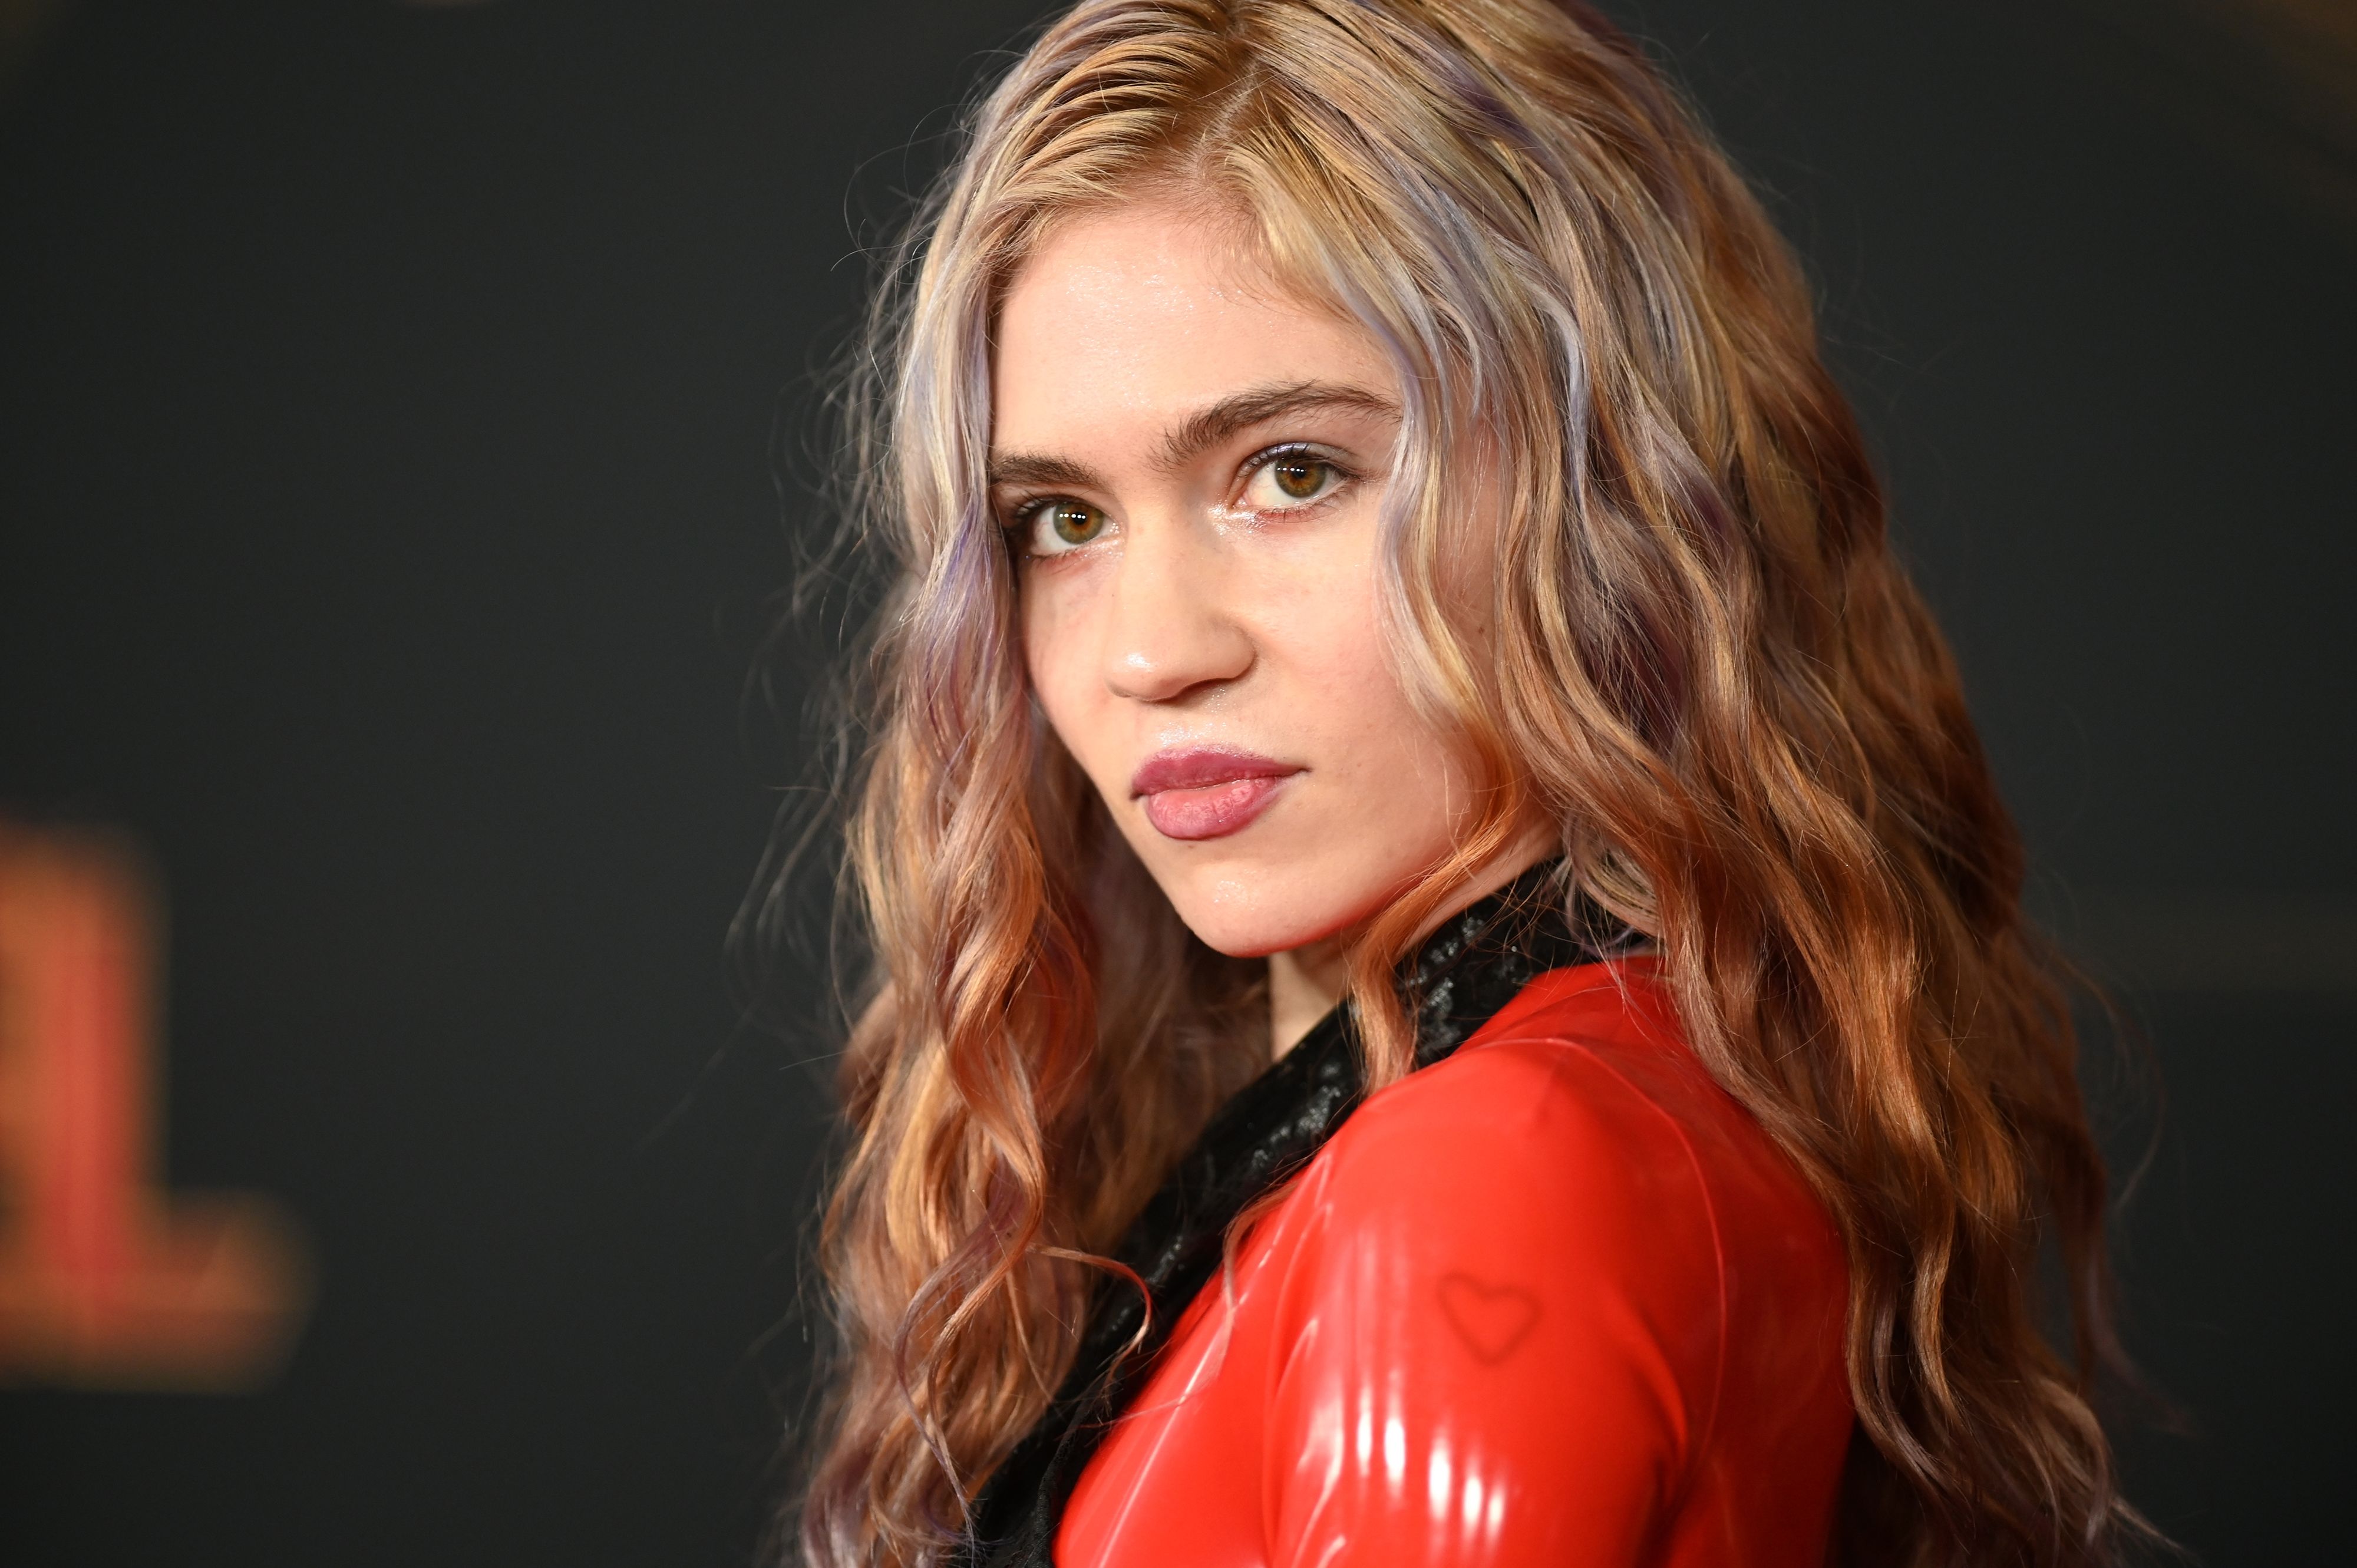 Canadian singer-songwriter Grimes (Claire Elise Boucher) attends the world premiere of "Captain Marvel" in Hollywood, California